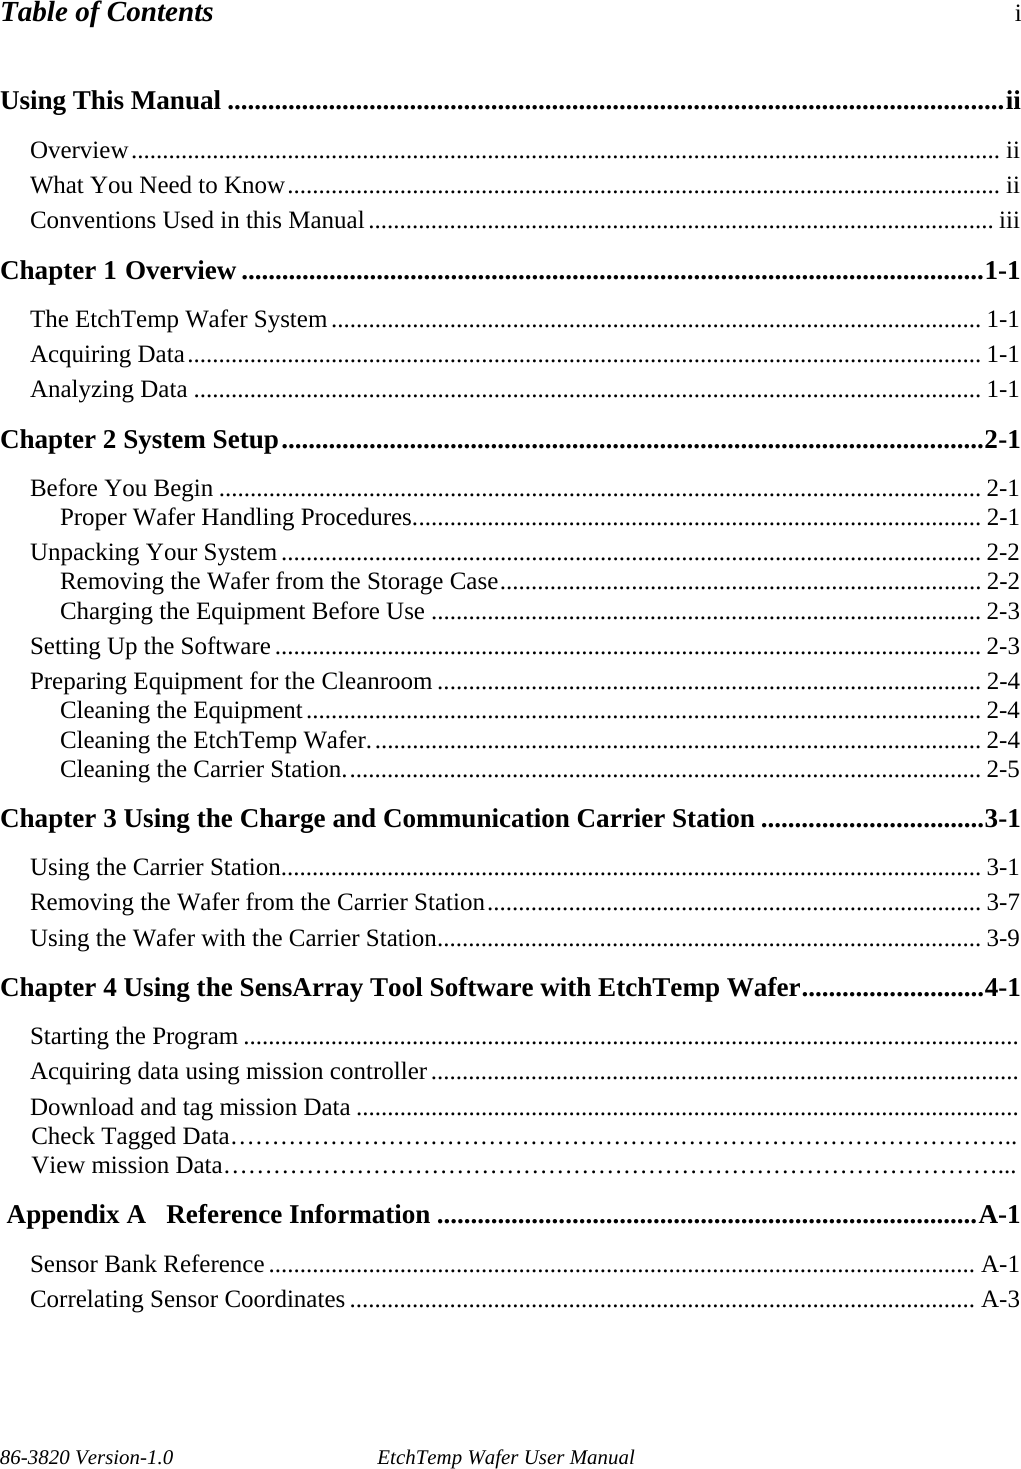 Table of Contents i Using This Manual ...................................................................................................................ii Overview........................................................................................................................................... ii What You Need to Know.................................................................................................................. ii Conventions Used in this Manual.................................................................................................... iii Chapter 1 Overview ..............................................................................................................1-1 The EtchTemp Wafer System........................................................................................................ 1-1 Acquiring Data............................................................................................................................... 1-1 Analyzing Data .............................................................................................................................. 1-1 Chapter 2 System Setup........................................................................................................2-1 Before You Begin .......................................................................................................................... 2-1 Proper Wafer Handling Procedures........................................................................................... 2-1 Unpacking Your System................................................................................................................ 2-2 Removing the Wafer from the Storage Case............................................................................. 2-2 Charging the Equipment Before Use ........................................................................................ 2-3 Setting Up the Software................................................................................................................. 2-3 Preparing Equipment for the Cleanroom ....................................................................................... 2-4 Cleaning the Equipment............................................................................................................ 2-4 Cleaning the EtchTemp Wafer.................................................................................................. 2-4 Cleaning the Carrier Station...................................................................................................... 2-5 Chapter 3 Using the Charge and Communication Carrier Station .................................3-1 Using the Carrier Station................................................................................................................ 3-1 Removing the Wafer from the Carrier Station............................................................................... 3-7 Using the Wafer with the Carrier Station....................................................................................... 3-9 Chapter 4 Using the SensArray Tool Software with EtchTemp Wafer...........................4-1 Starting the Program ............................................................................................................................ Acquiring data using mission controller.............................................................................................. Download and tag mission Data ..........................................................................................................      Check Tagged Data…………………………………………………………………………………..      View mission Data…………………………………………………………………………………...  Appendix A   Reference Information ................................................................................A-1 Sensor Bank Reference ................................................................................................................. A-1 Correlating Sensor Coordinates .................................................................................................... A-3        86-3820 Version-1.0  EtchTemp Wafer User Manual   